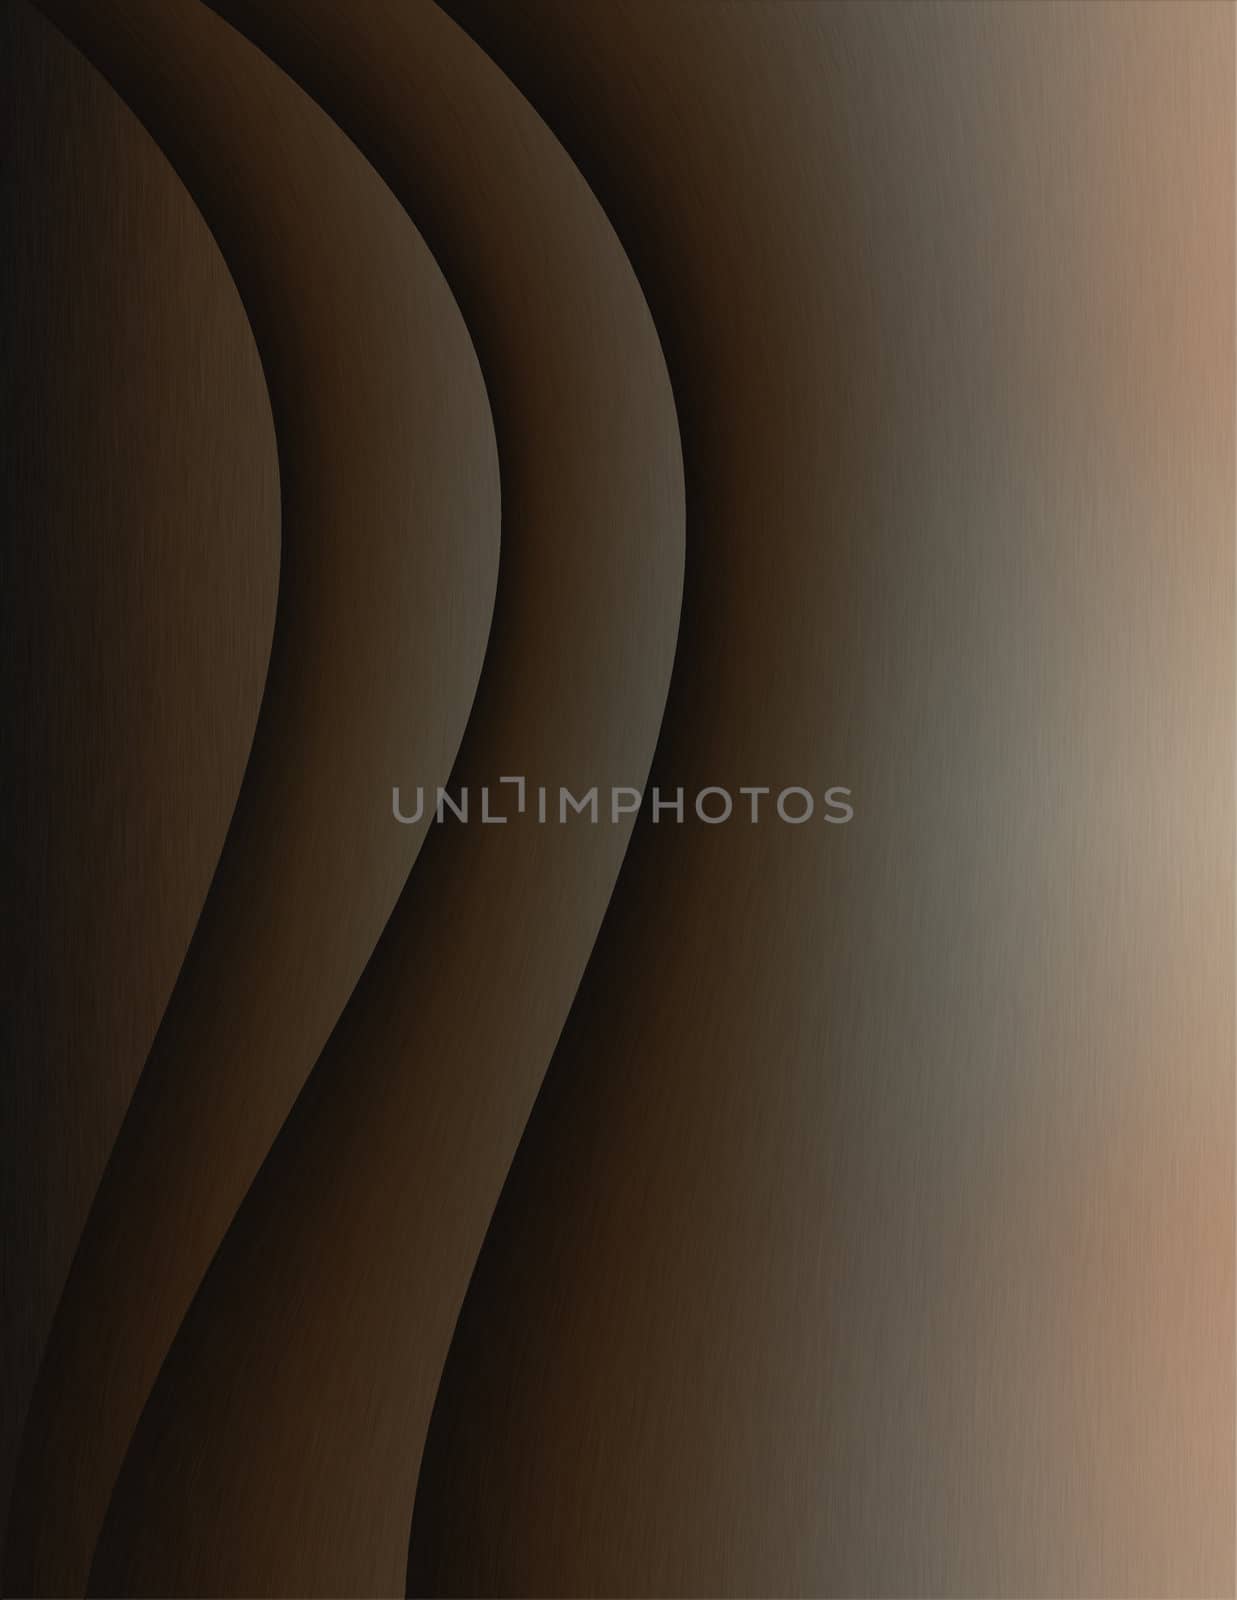 Dark metal curve abstract with brown background